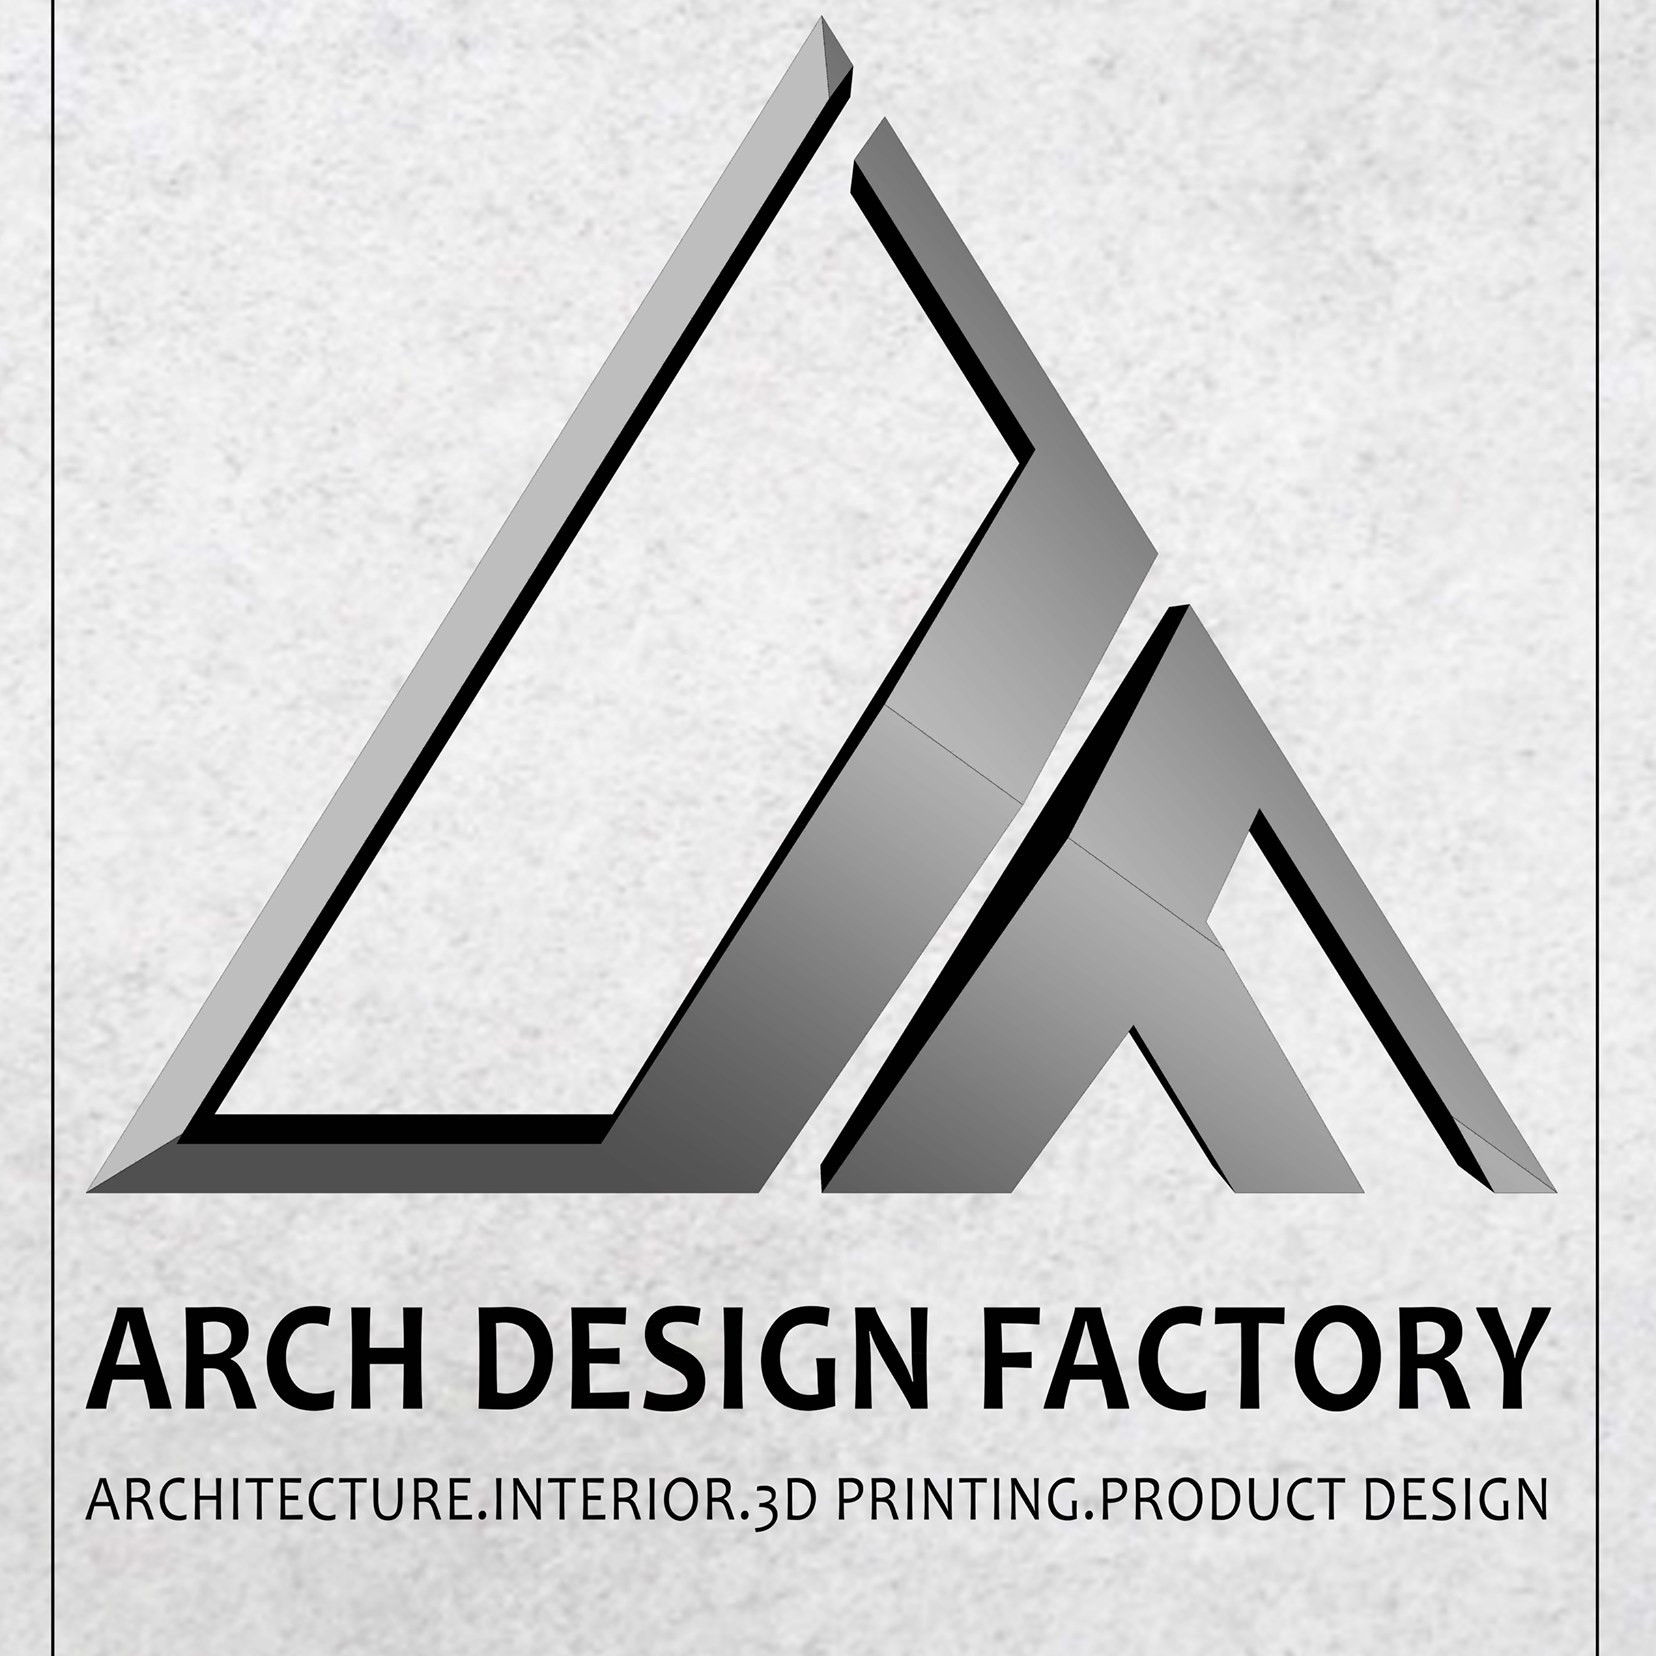 ADF ArchDesignfactory|Accounting Services|Professional Services